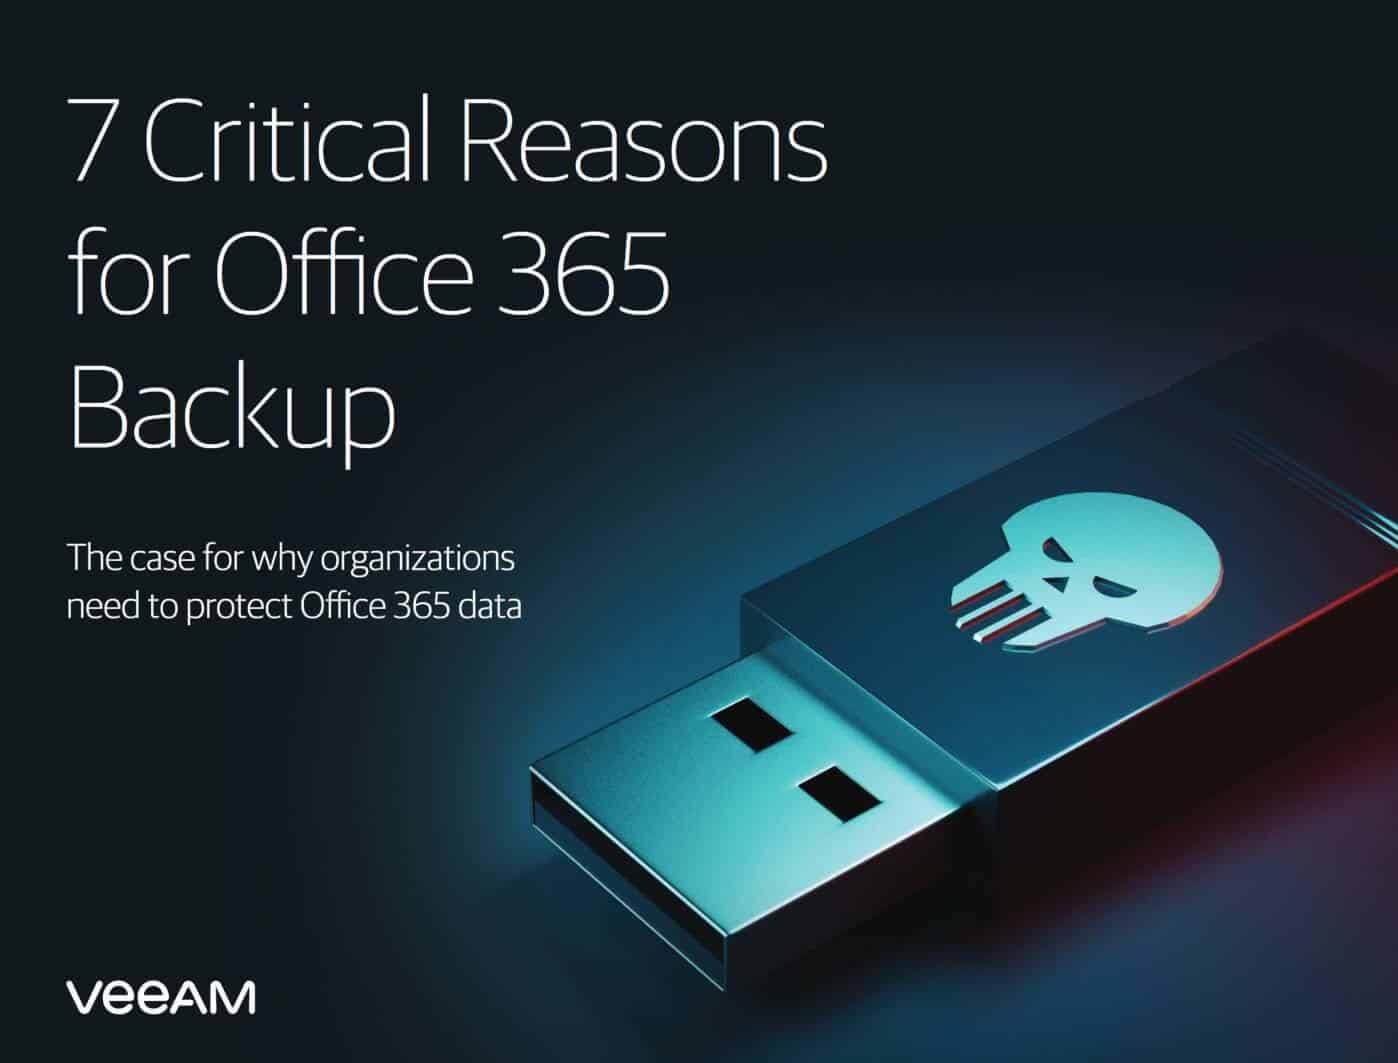 7 Critical Reasons for Office 365 Backup